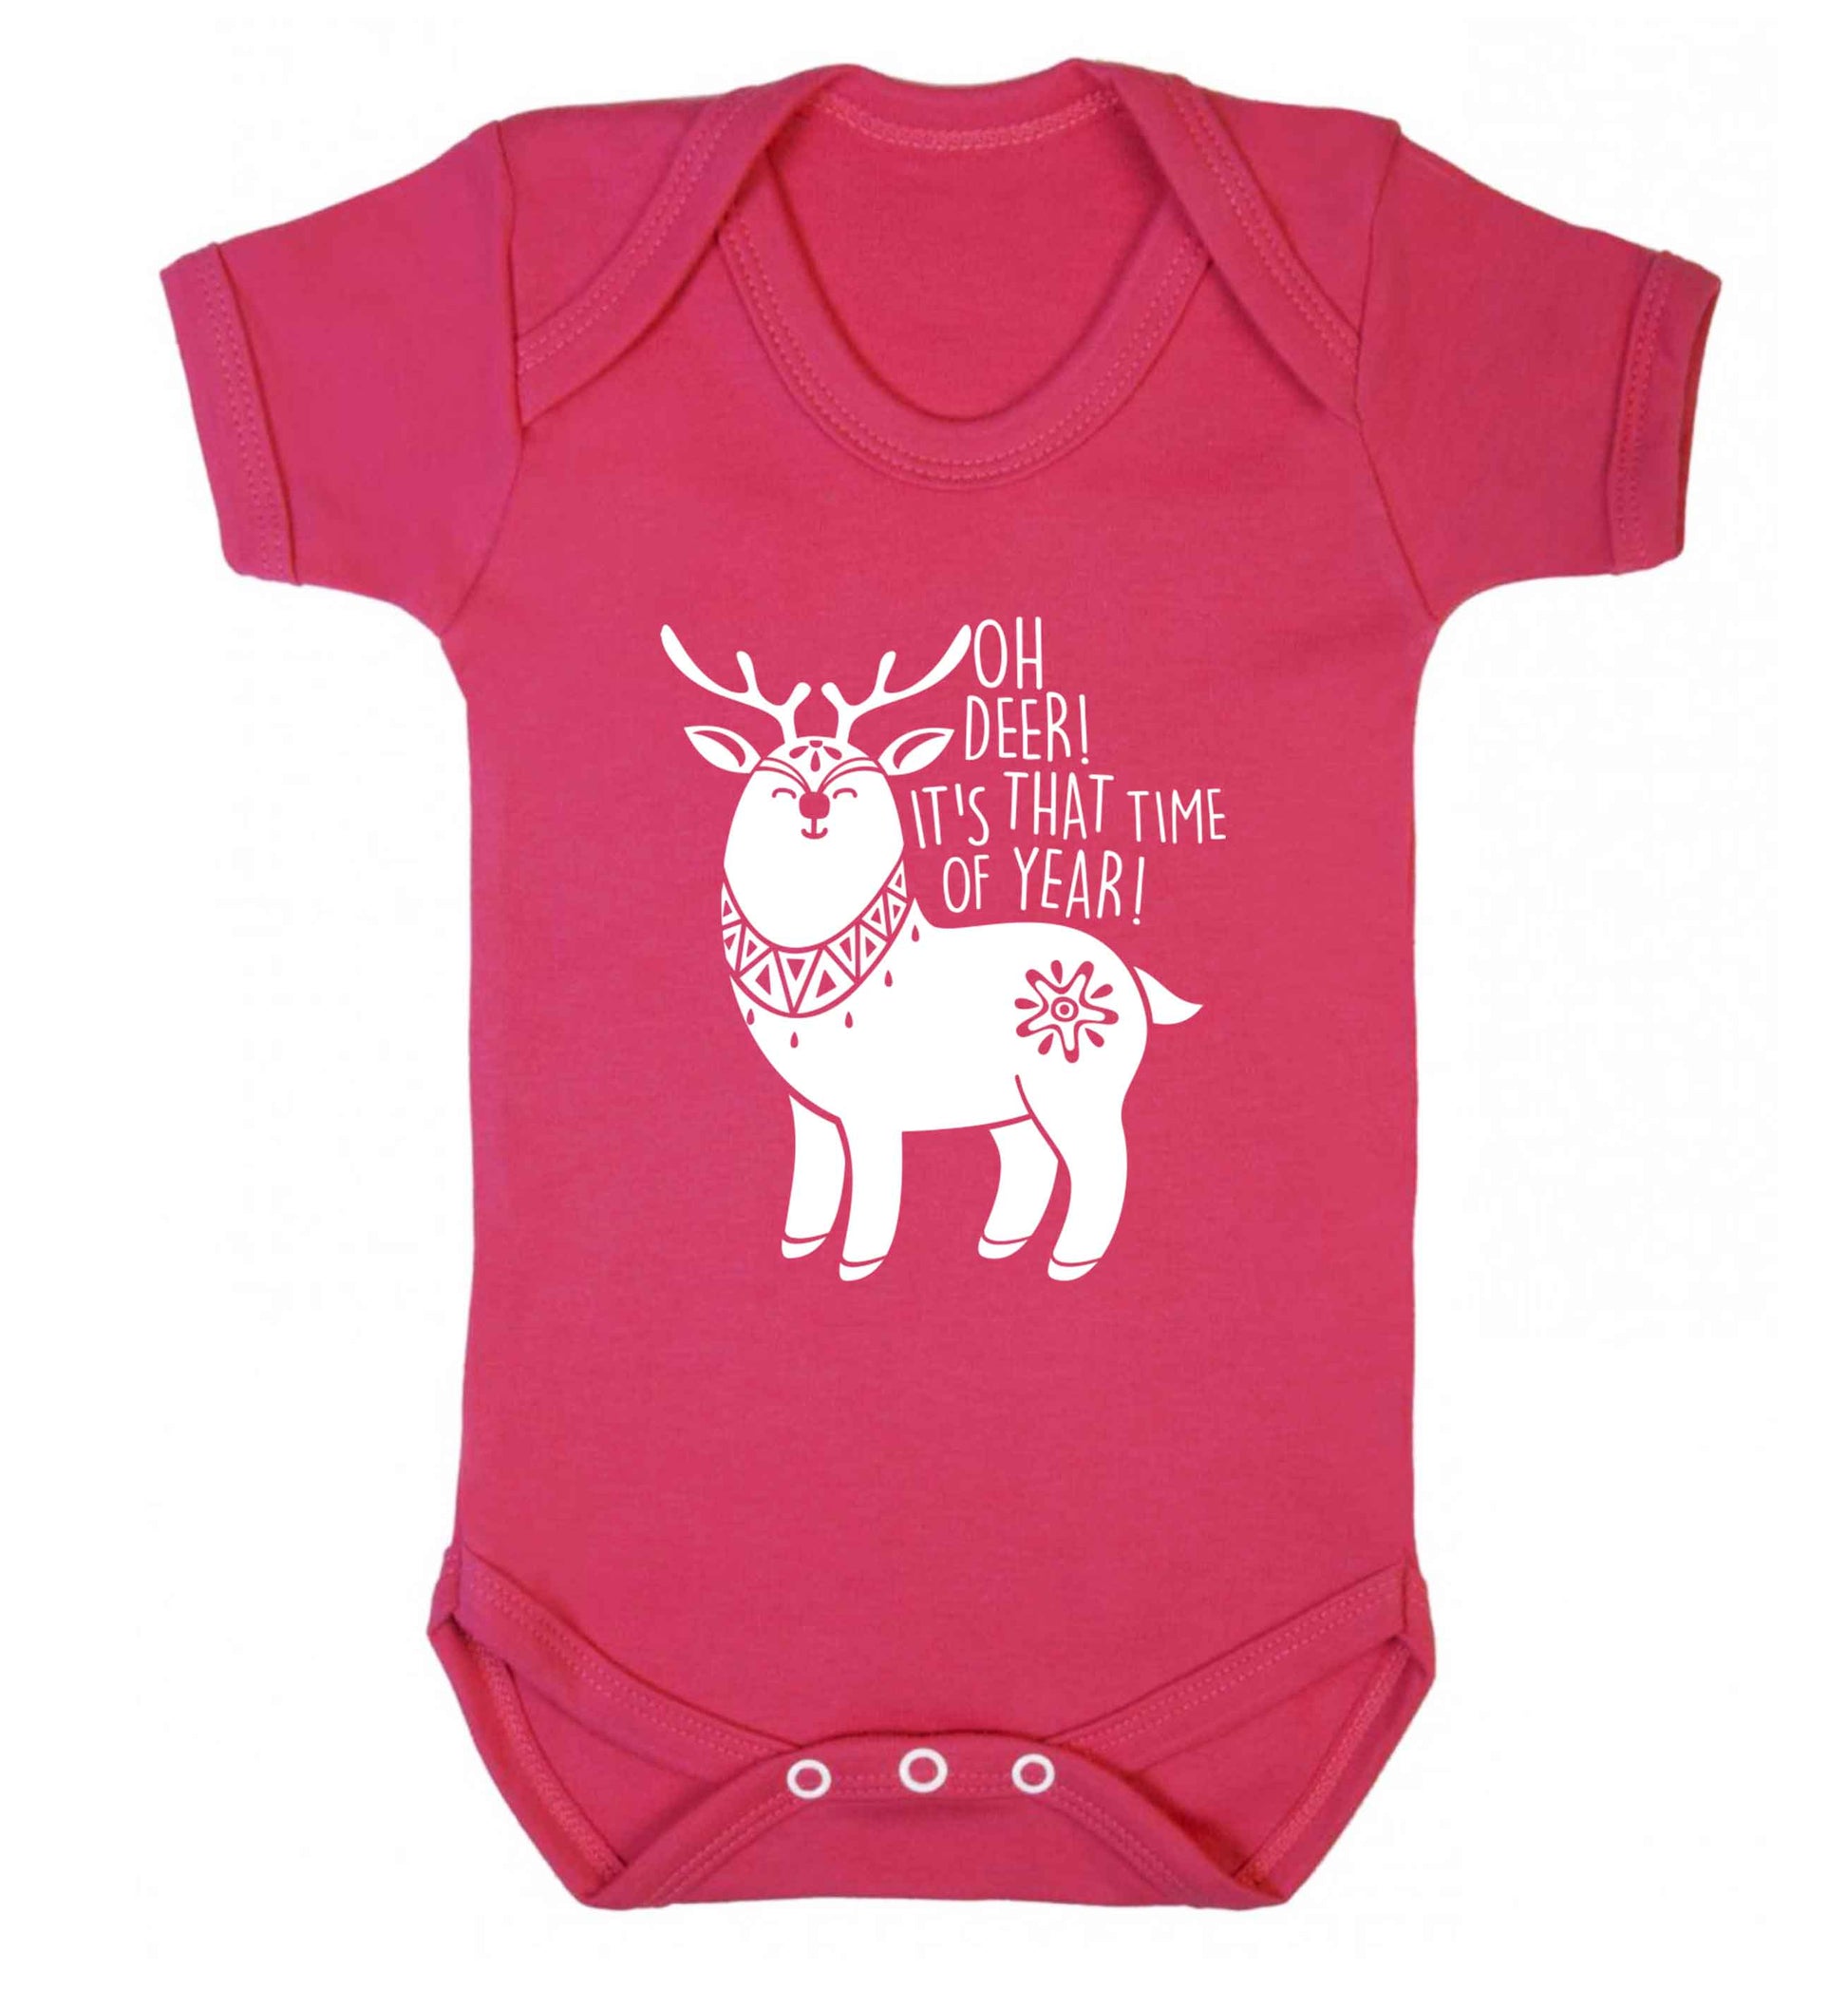 Oh dear it's that time of year Baby Vest dark pink 18-24 months